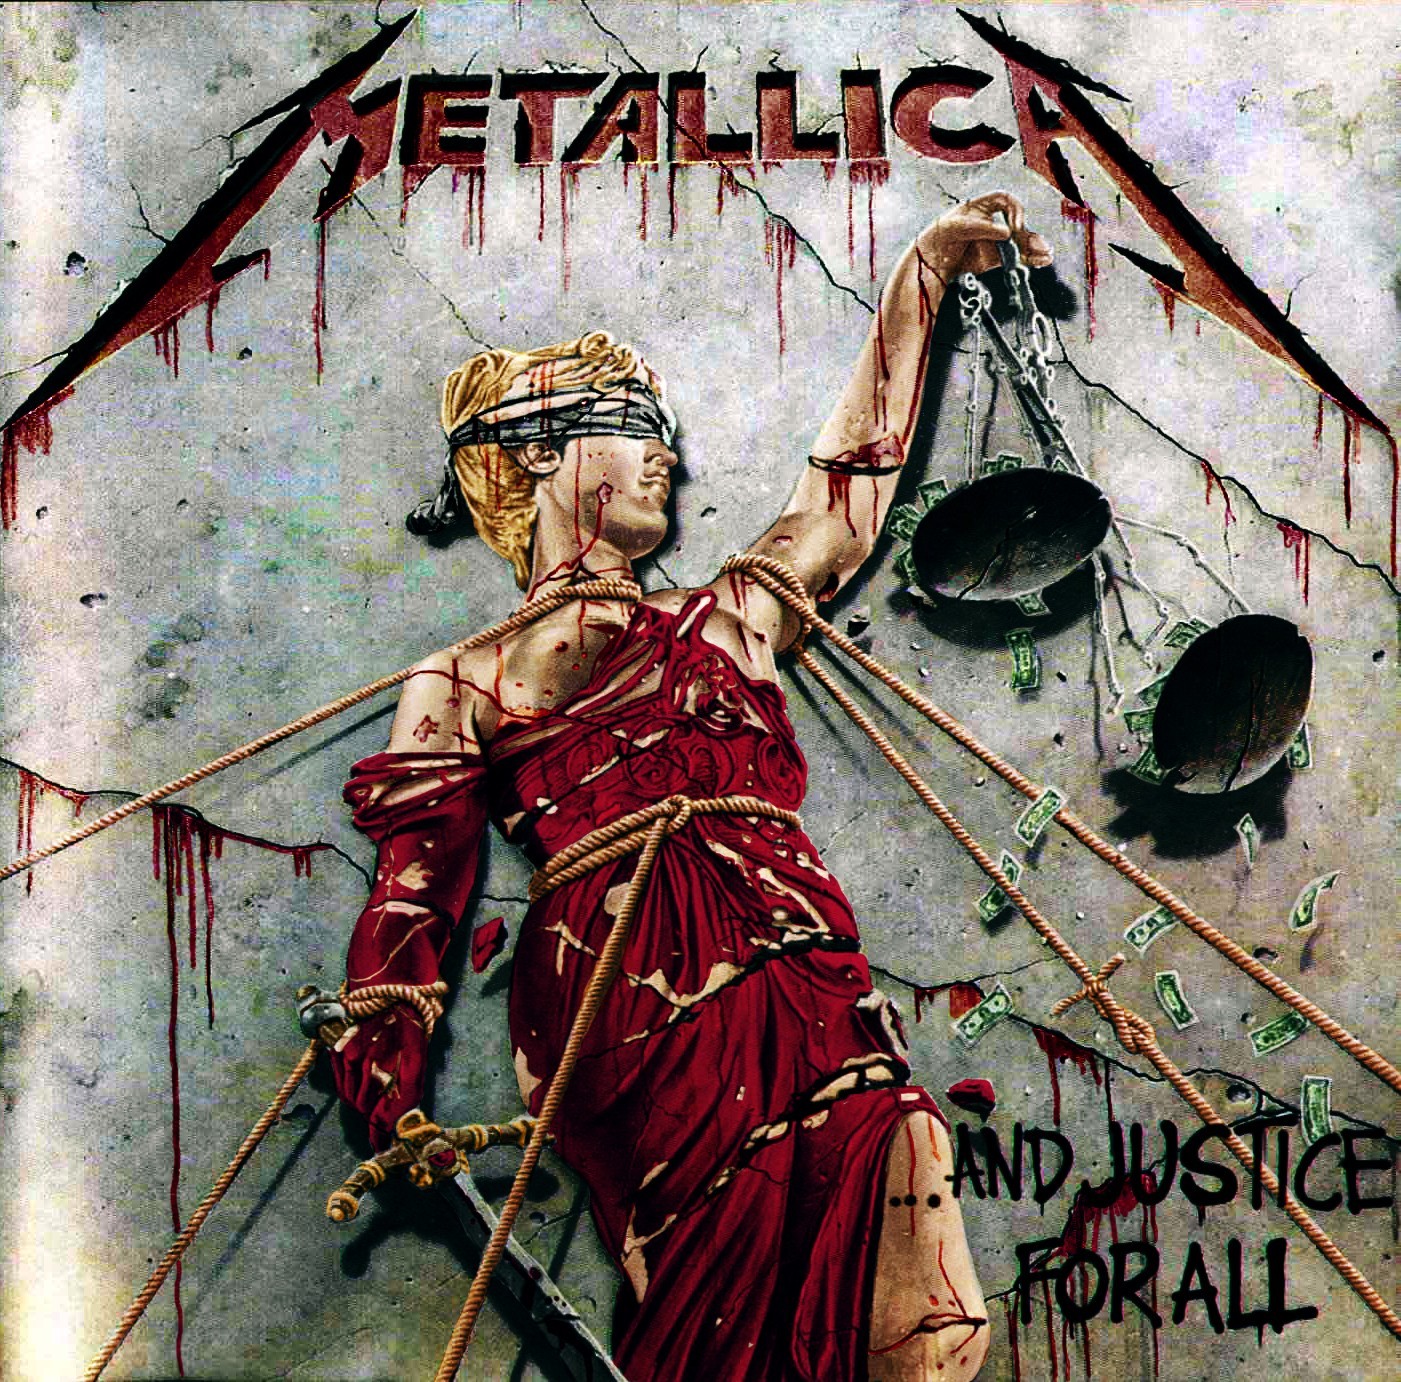 Instante justice. Metallica and Justice for all обложка. Metallica and Justice for all обложка альбома. 1988 ...And Justice for all. Metallica and Justice for all 1988.